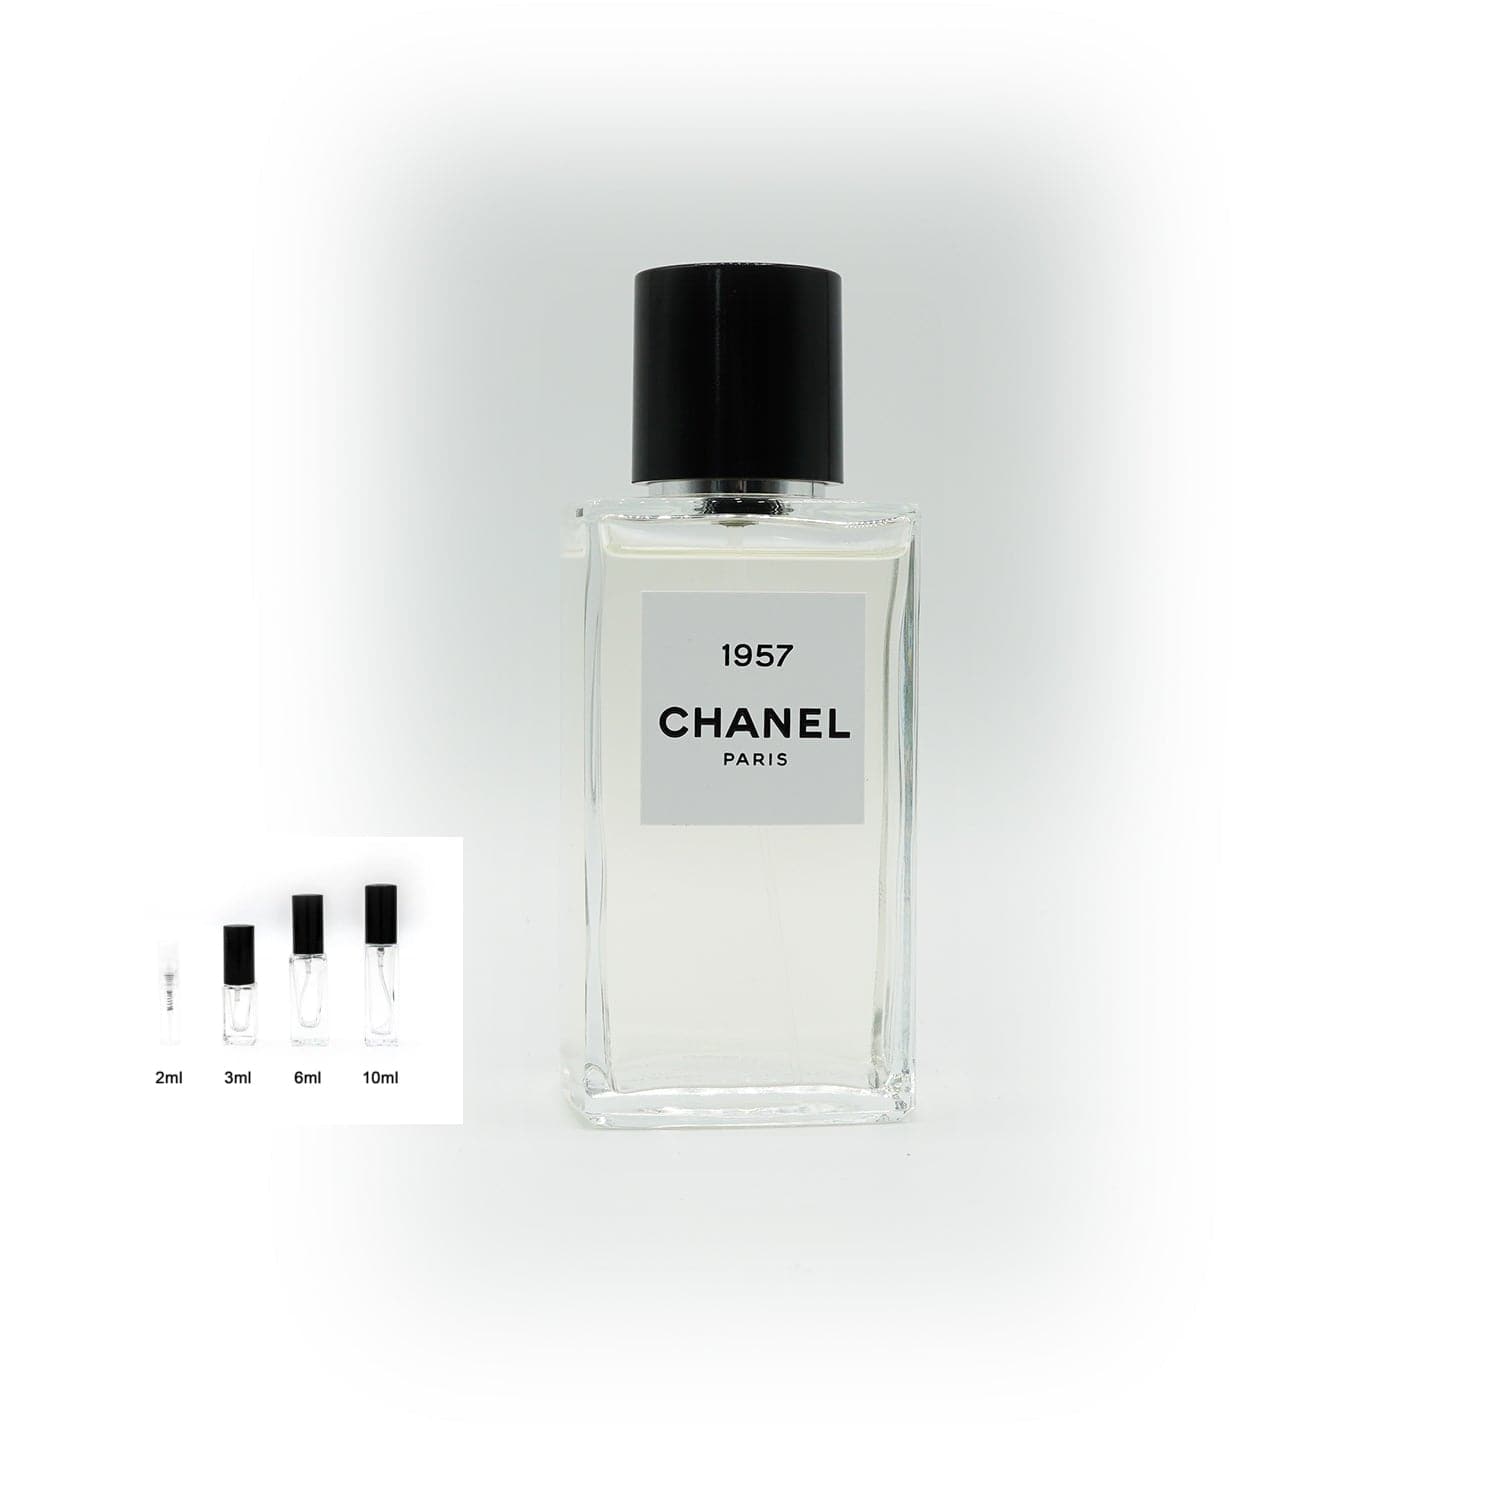 IS CHANEL 1957 A CLASSIC? OR JUST A BORING OLD SMELLING FRAGRANCE? 